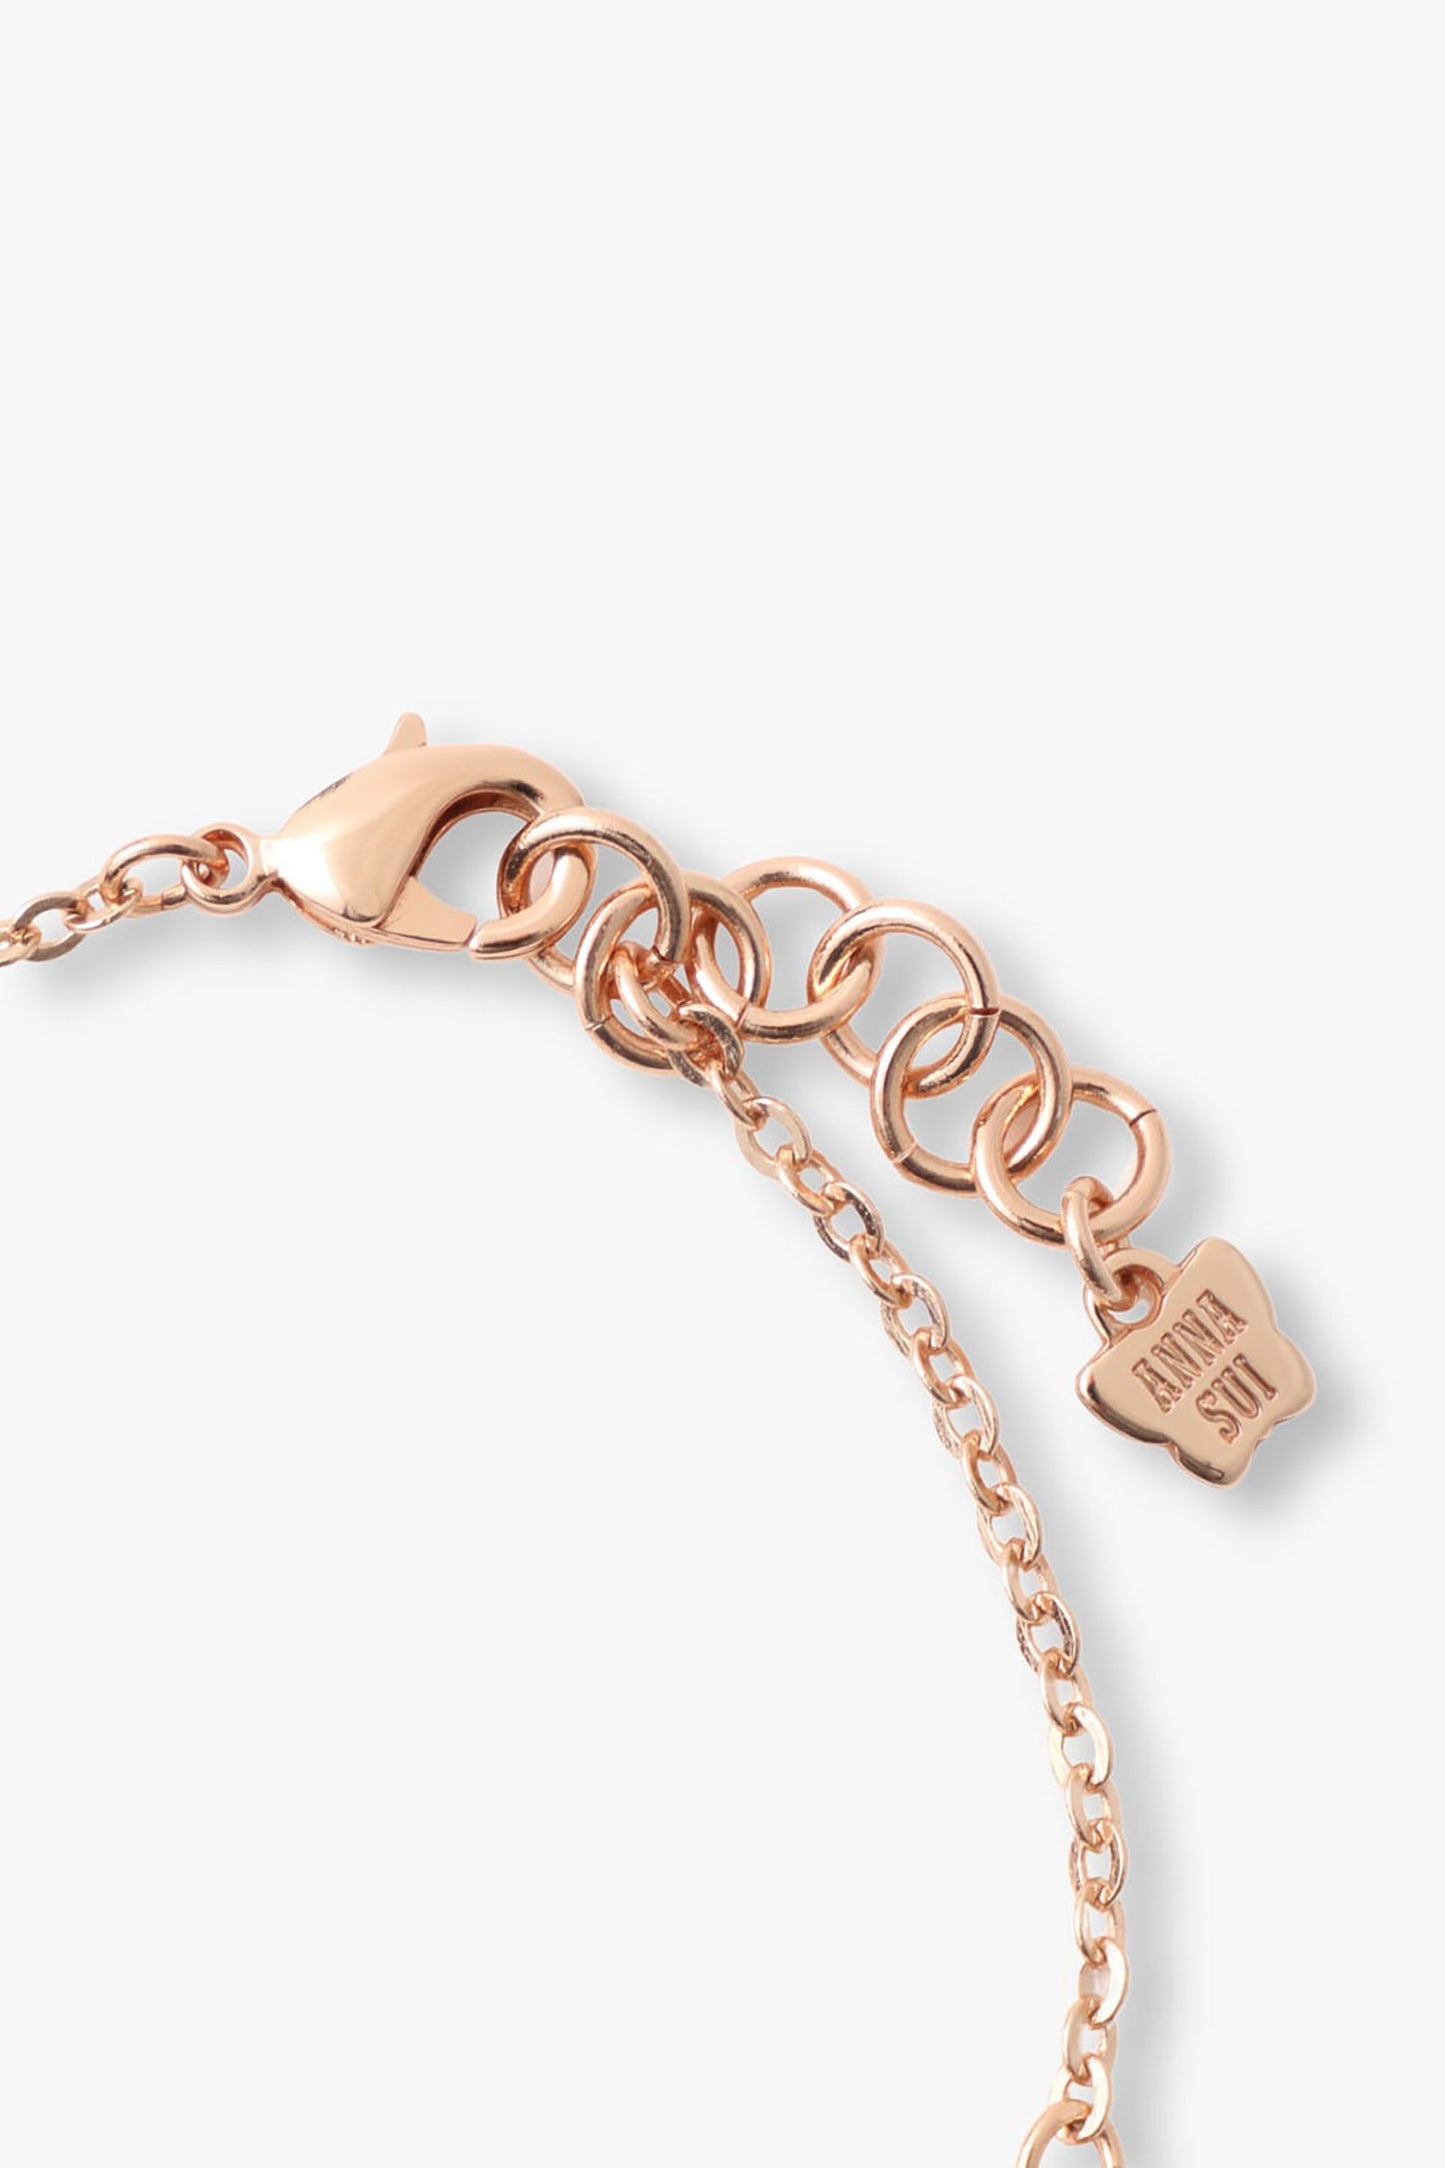 Rose Gold link chain, lobster claw clasp lock, Anna Sui imprint logo at the end